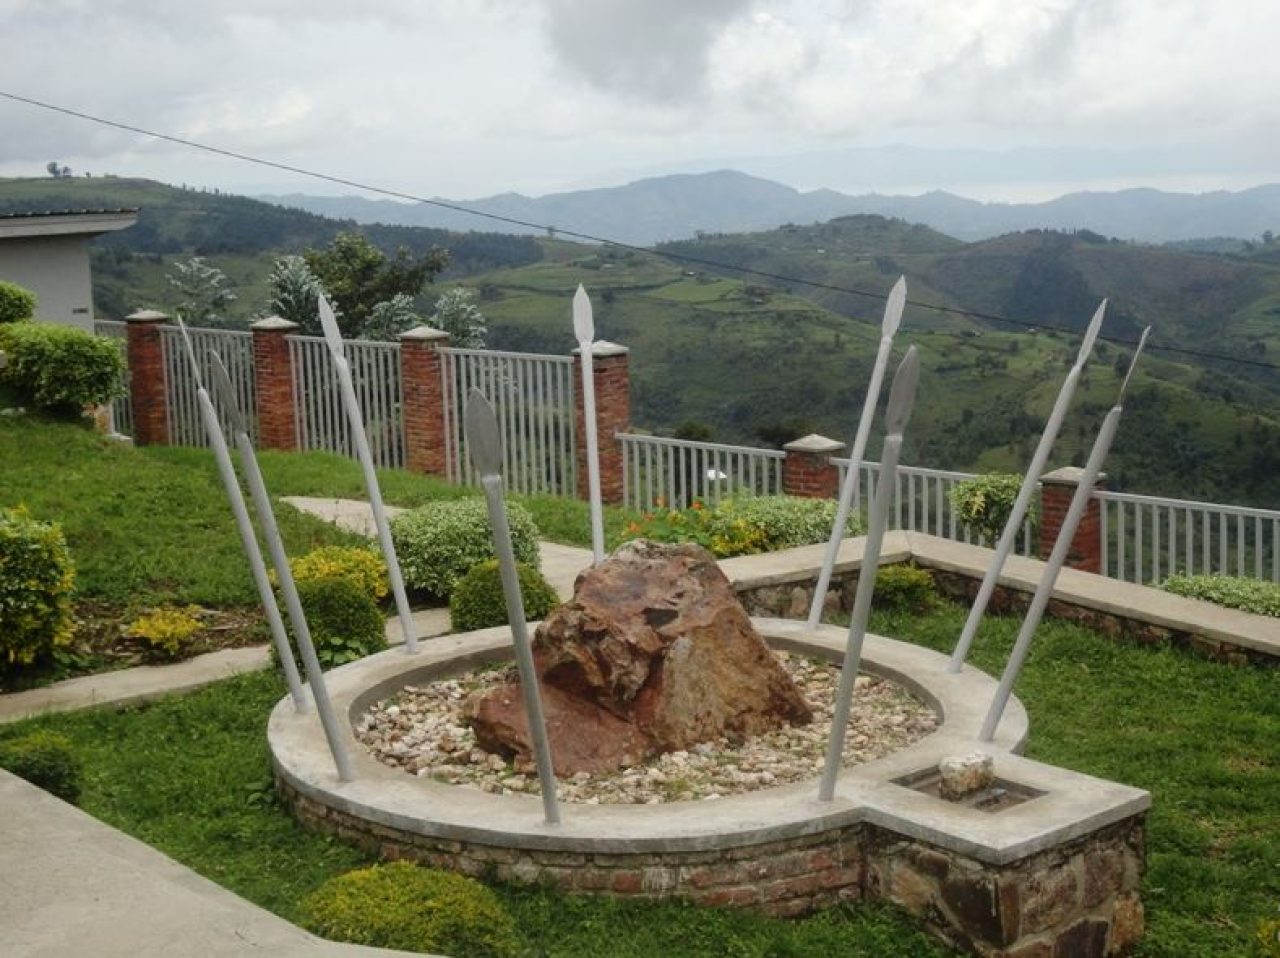 Four Rwandan Genocide Memorials Have Been Designated as World Heritage Sites. Afro News Wire